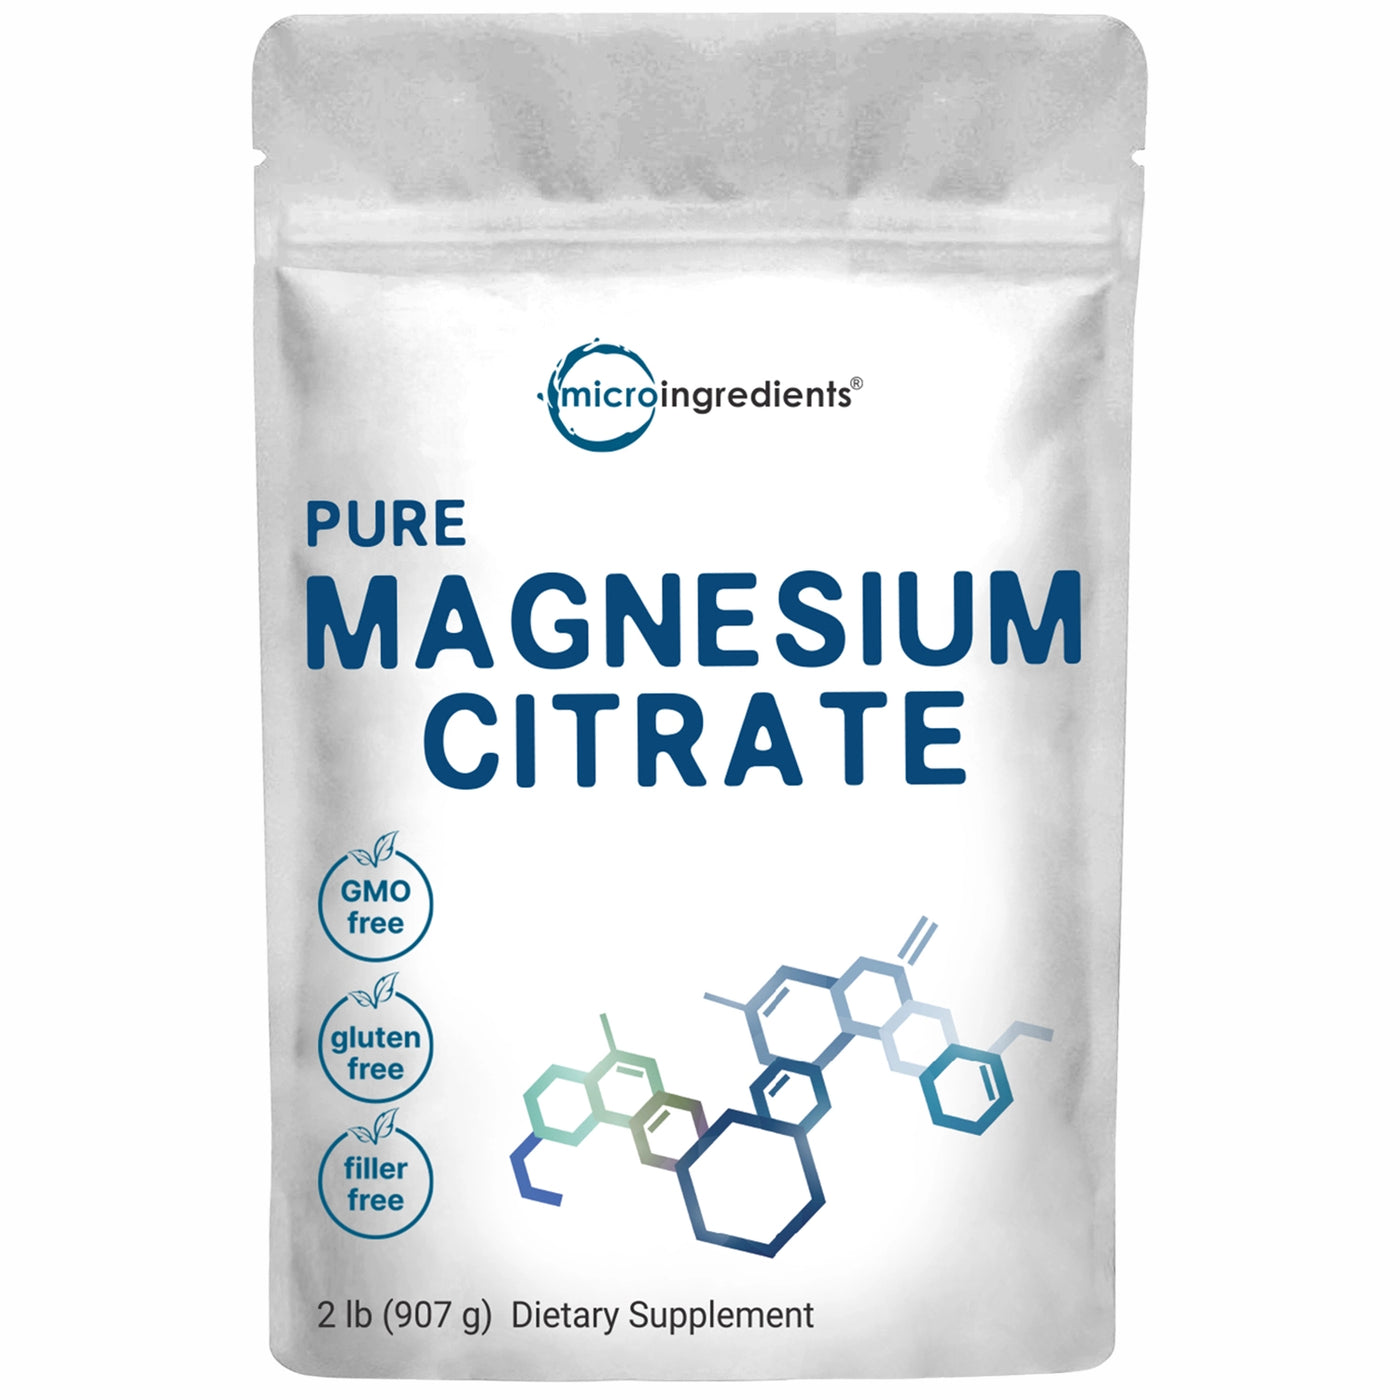 Magnesium Citrate Powder, 2 Pounds front